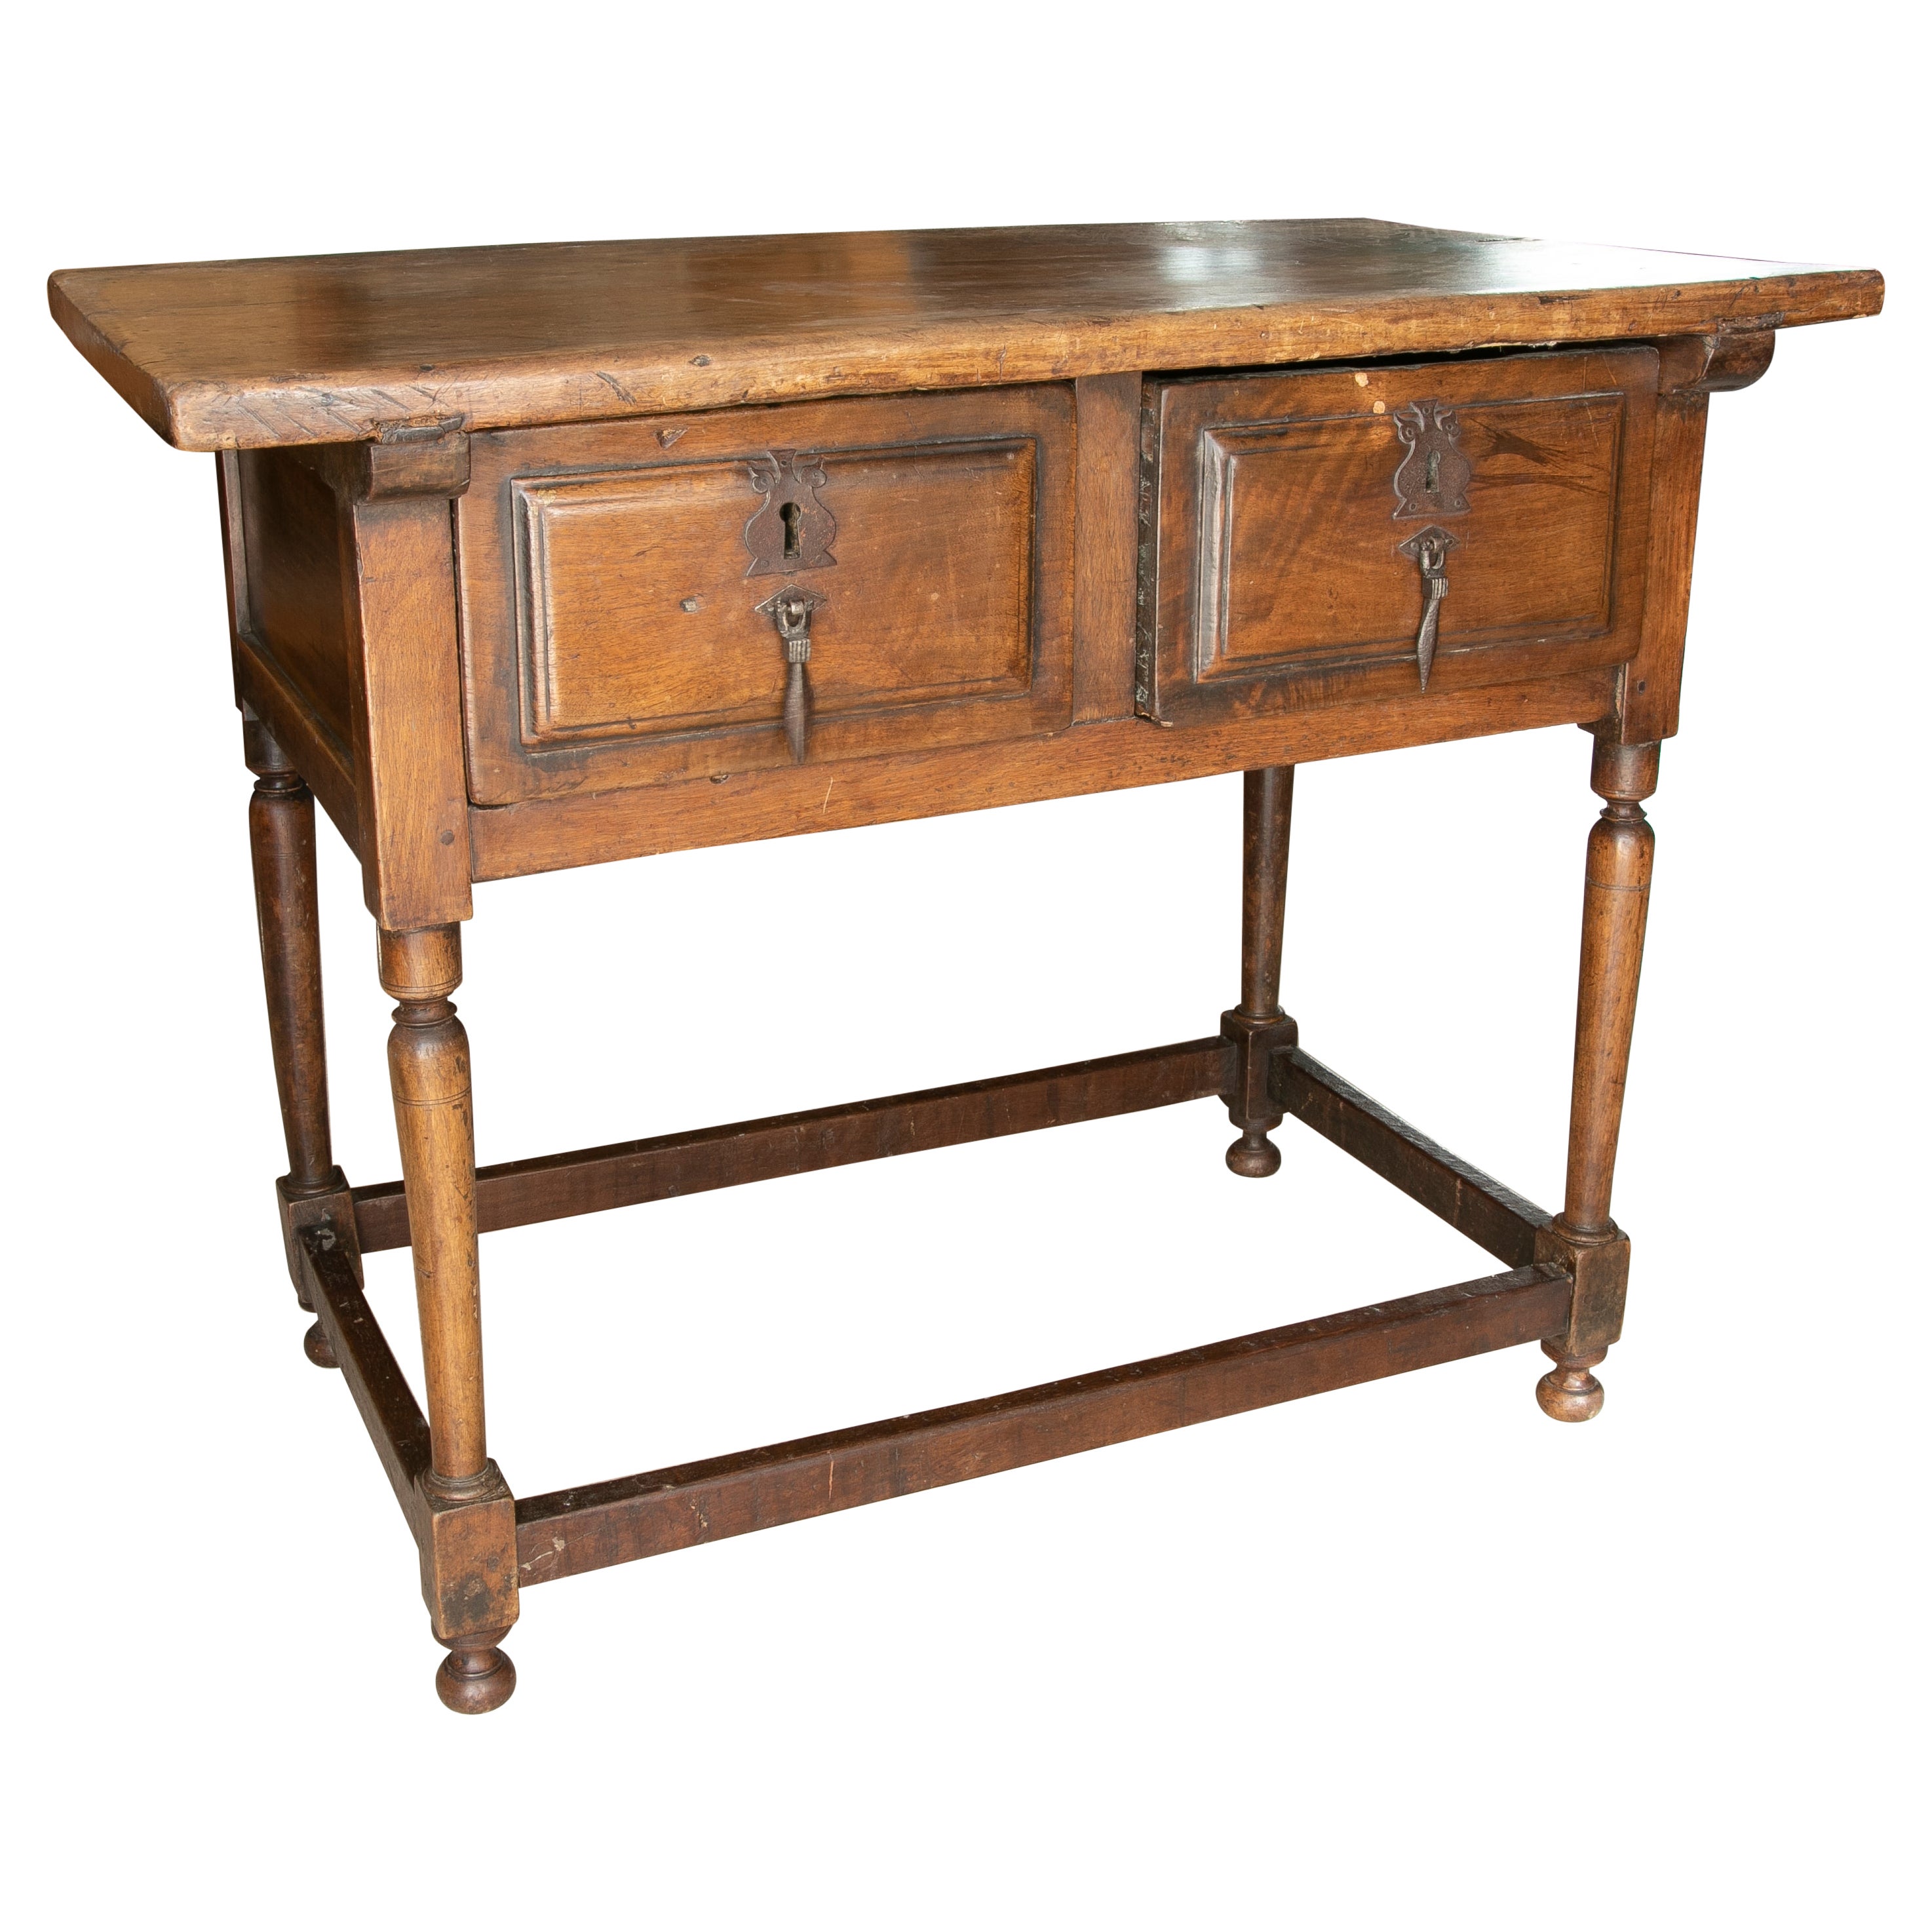 18th Century Walnut Writing Table with Two Drawers and Antique Fittings